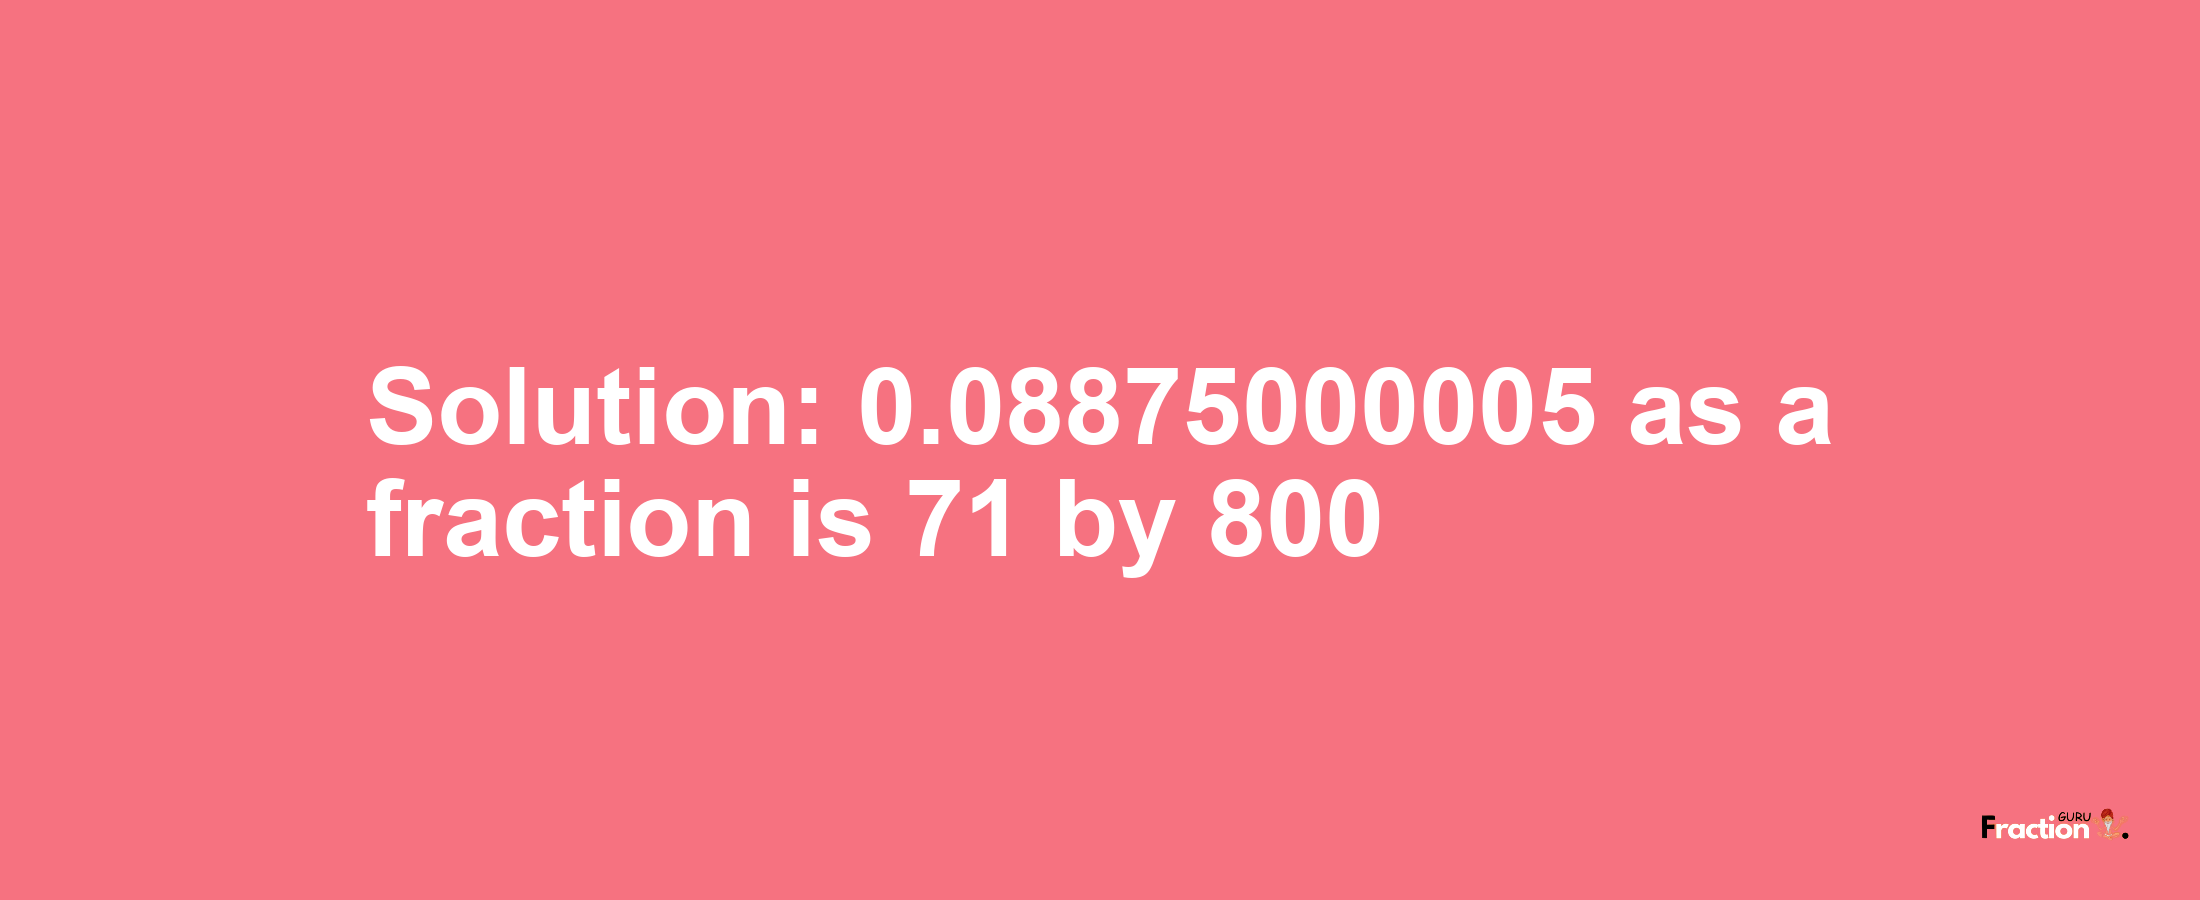 Solution:0.08875000005 as a fraction is 71/800